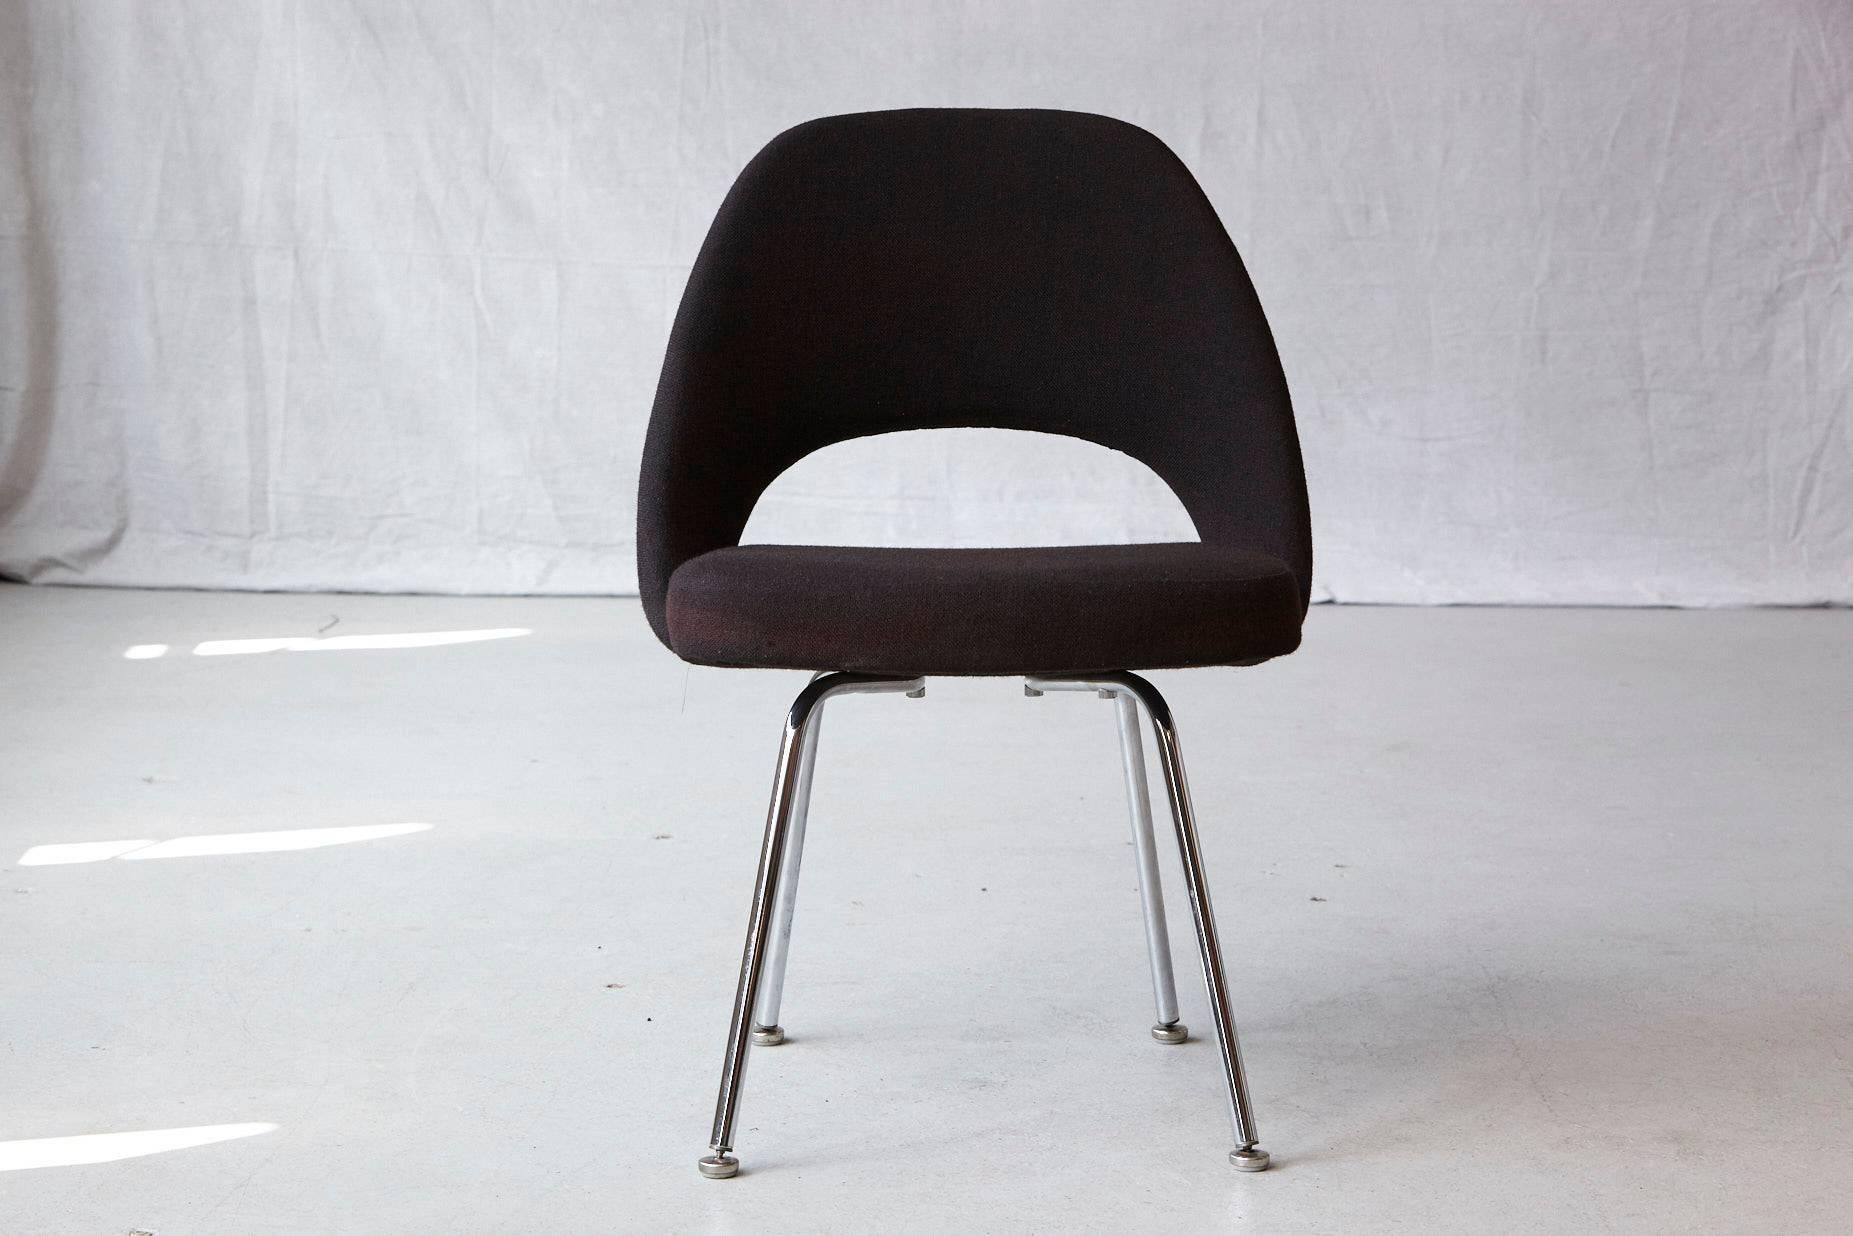 Original Eero Saarinen executive armless side or dining chair in black wool fabric with chrome legs.
Original fabric and foam in very good condition.